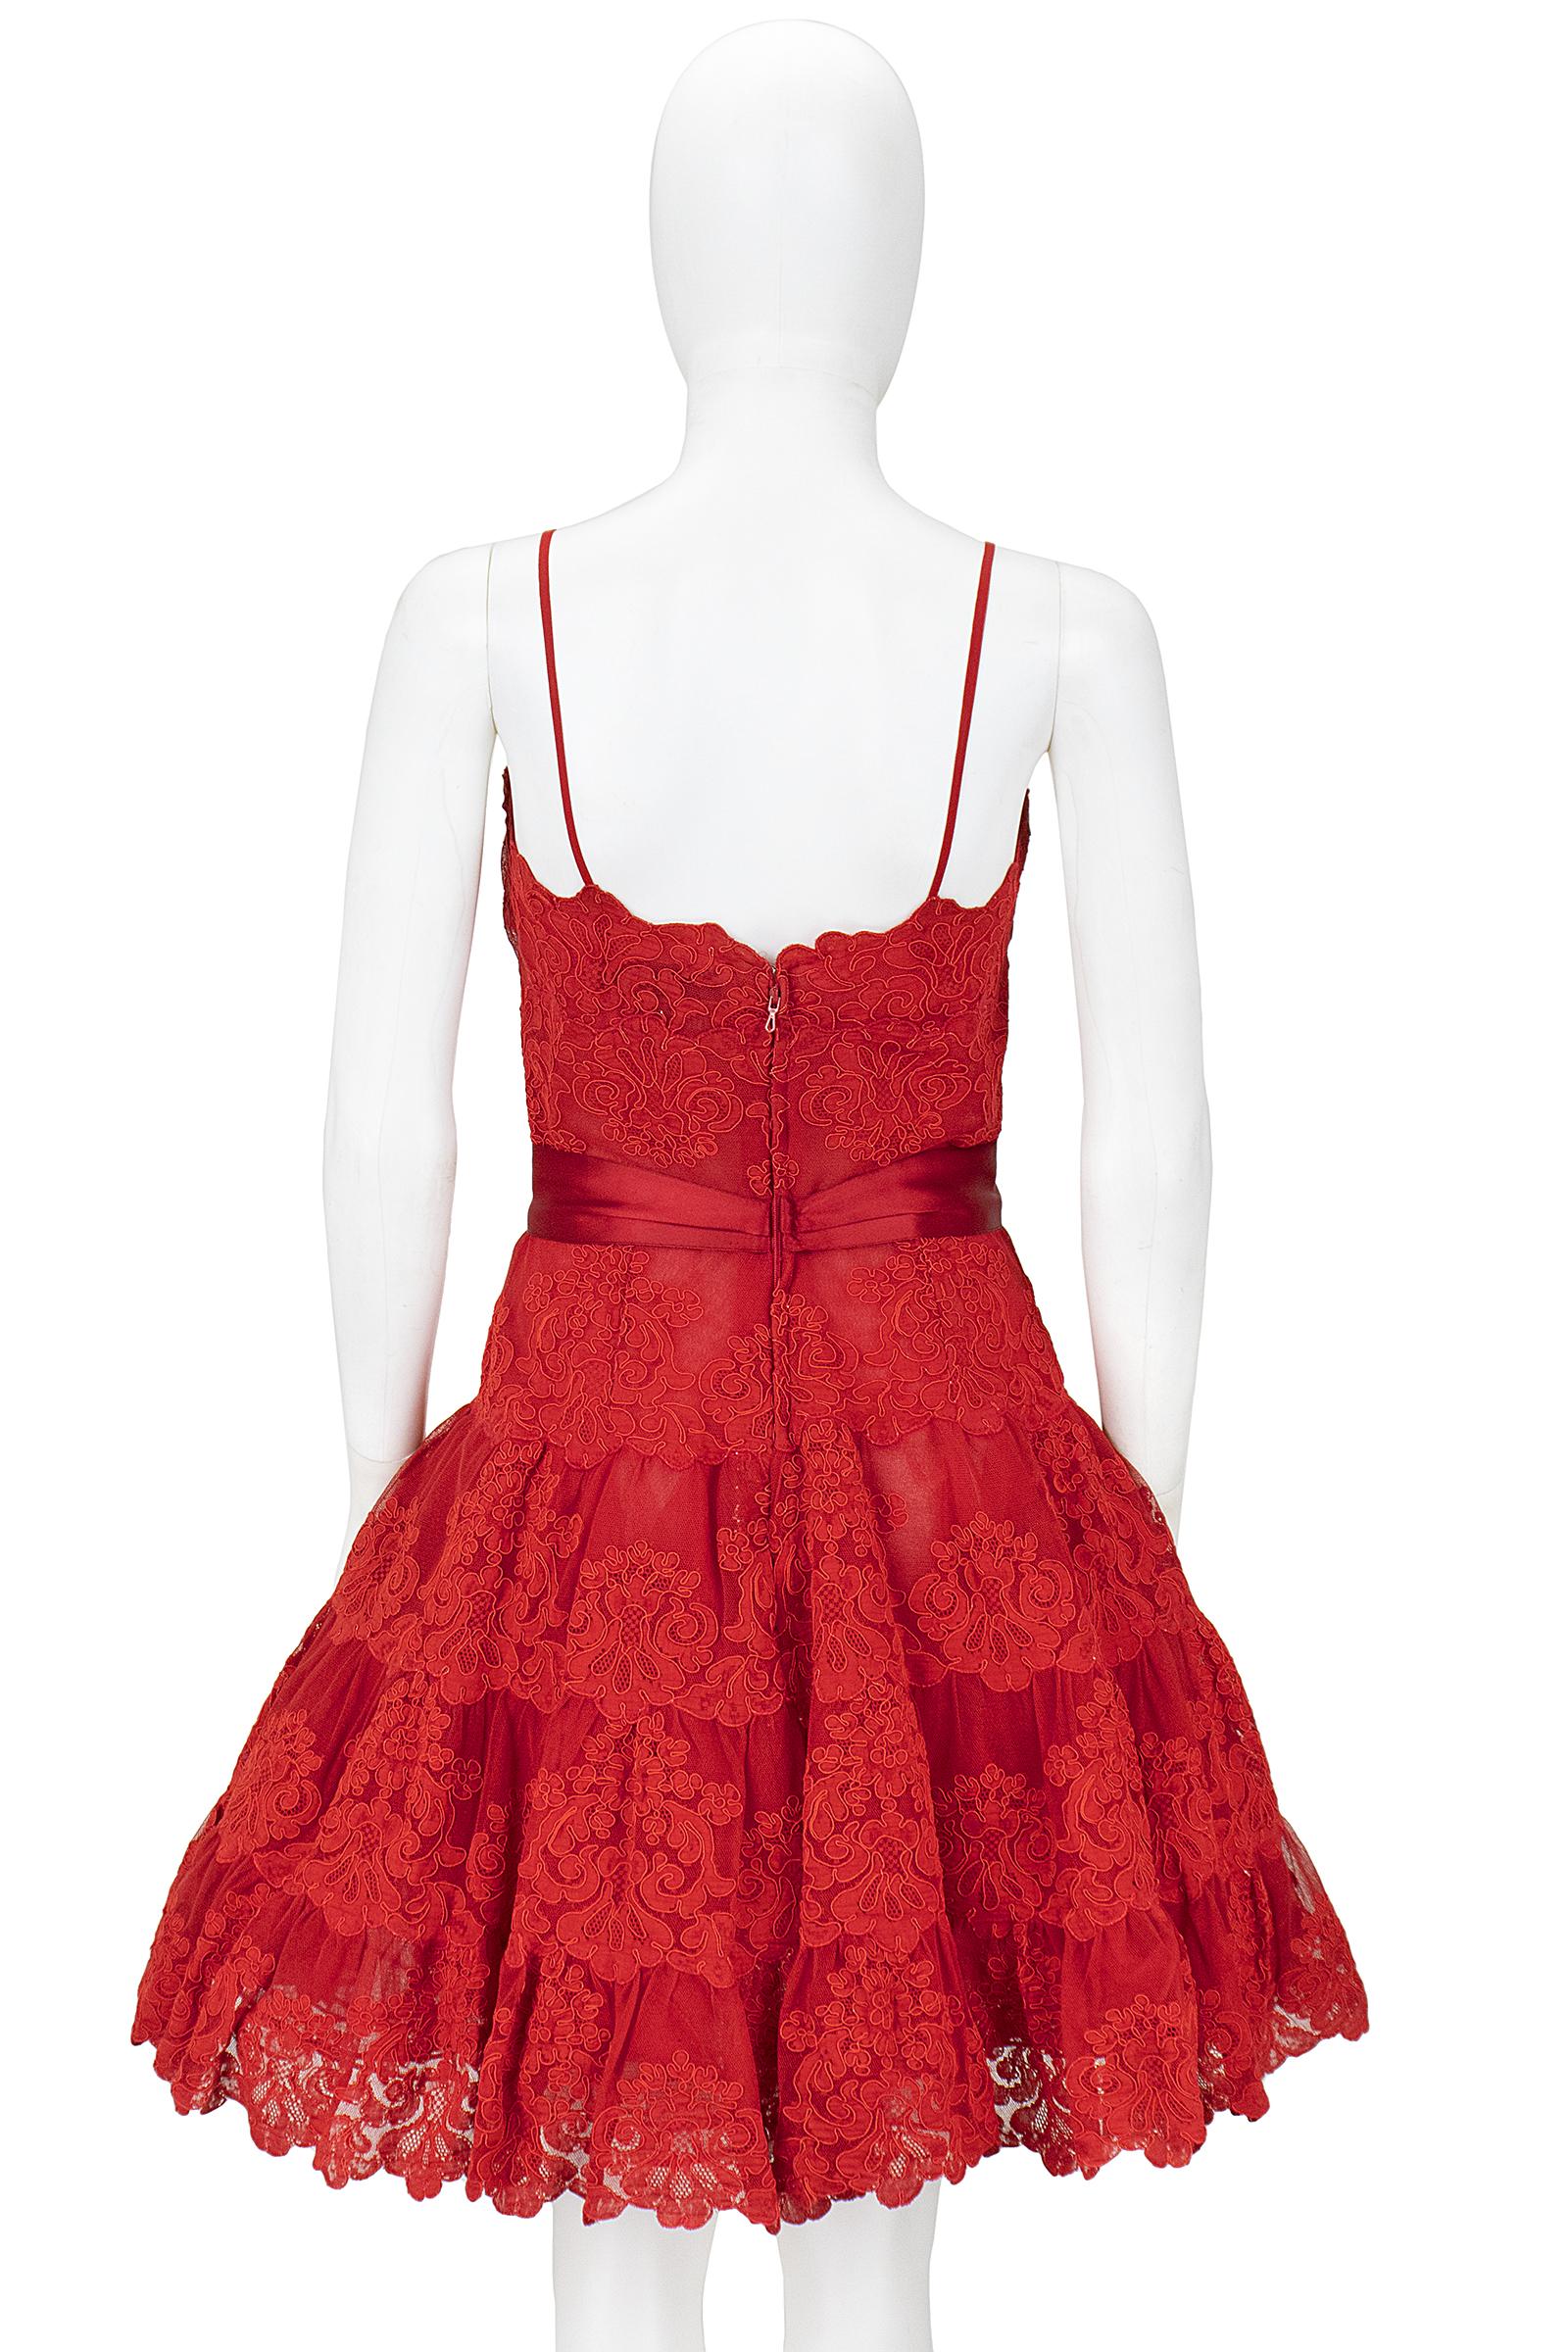  Vicky Tiel Couture Circa 1990s Red Lace Cocktail Dress For Sale 2